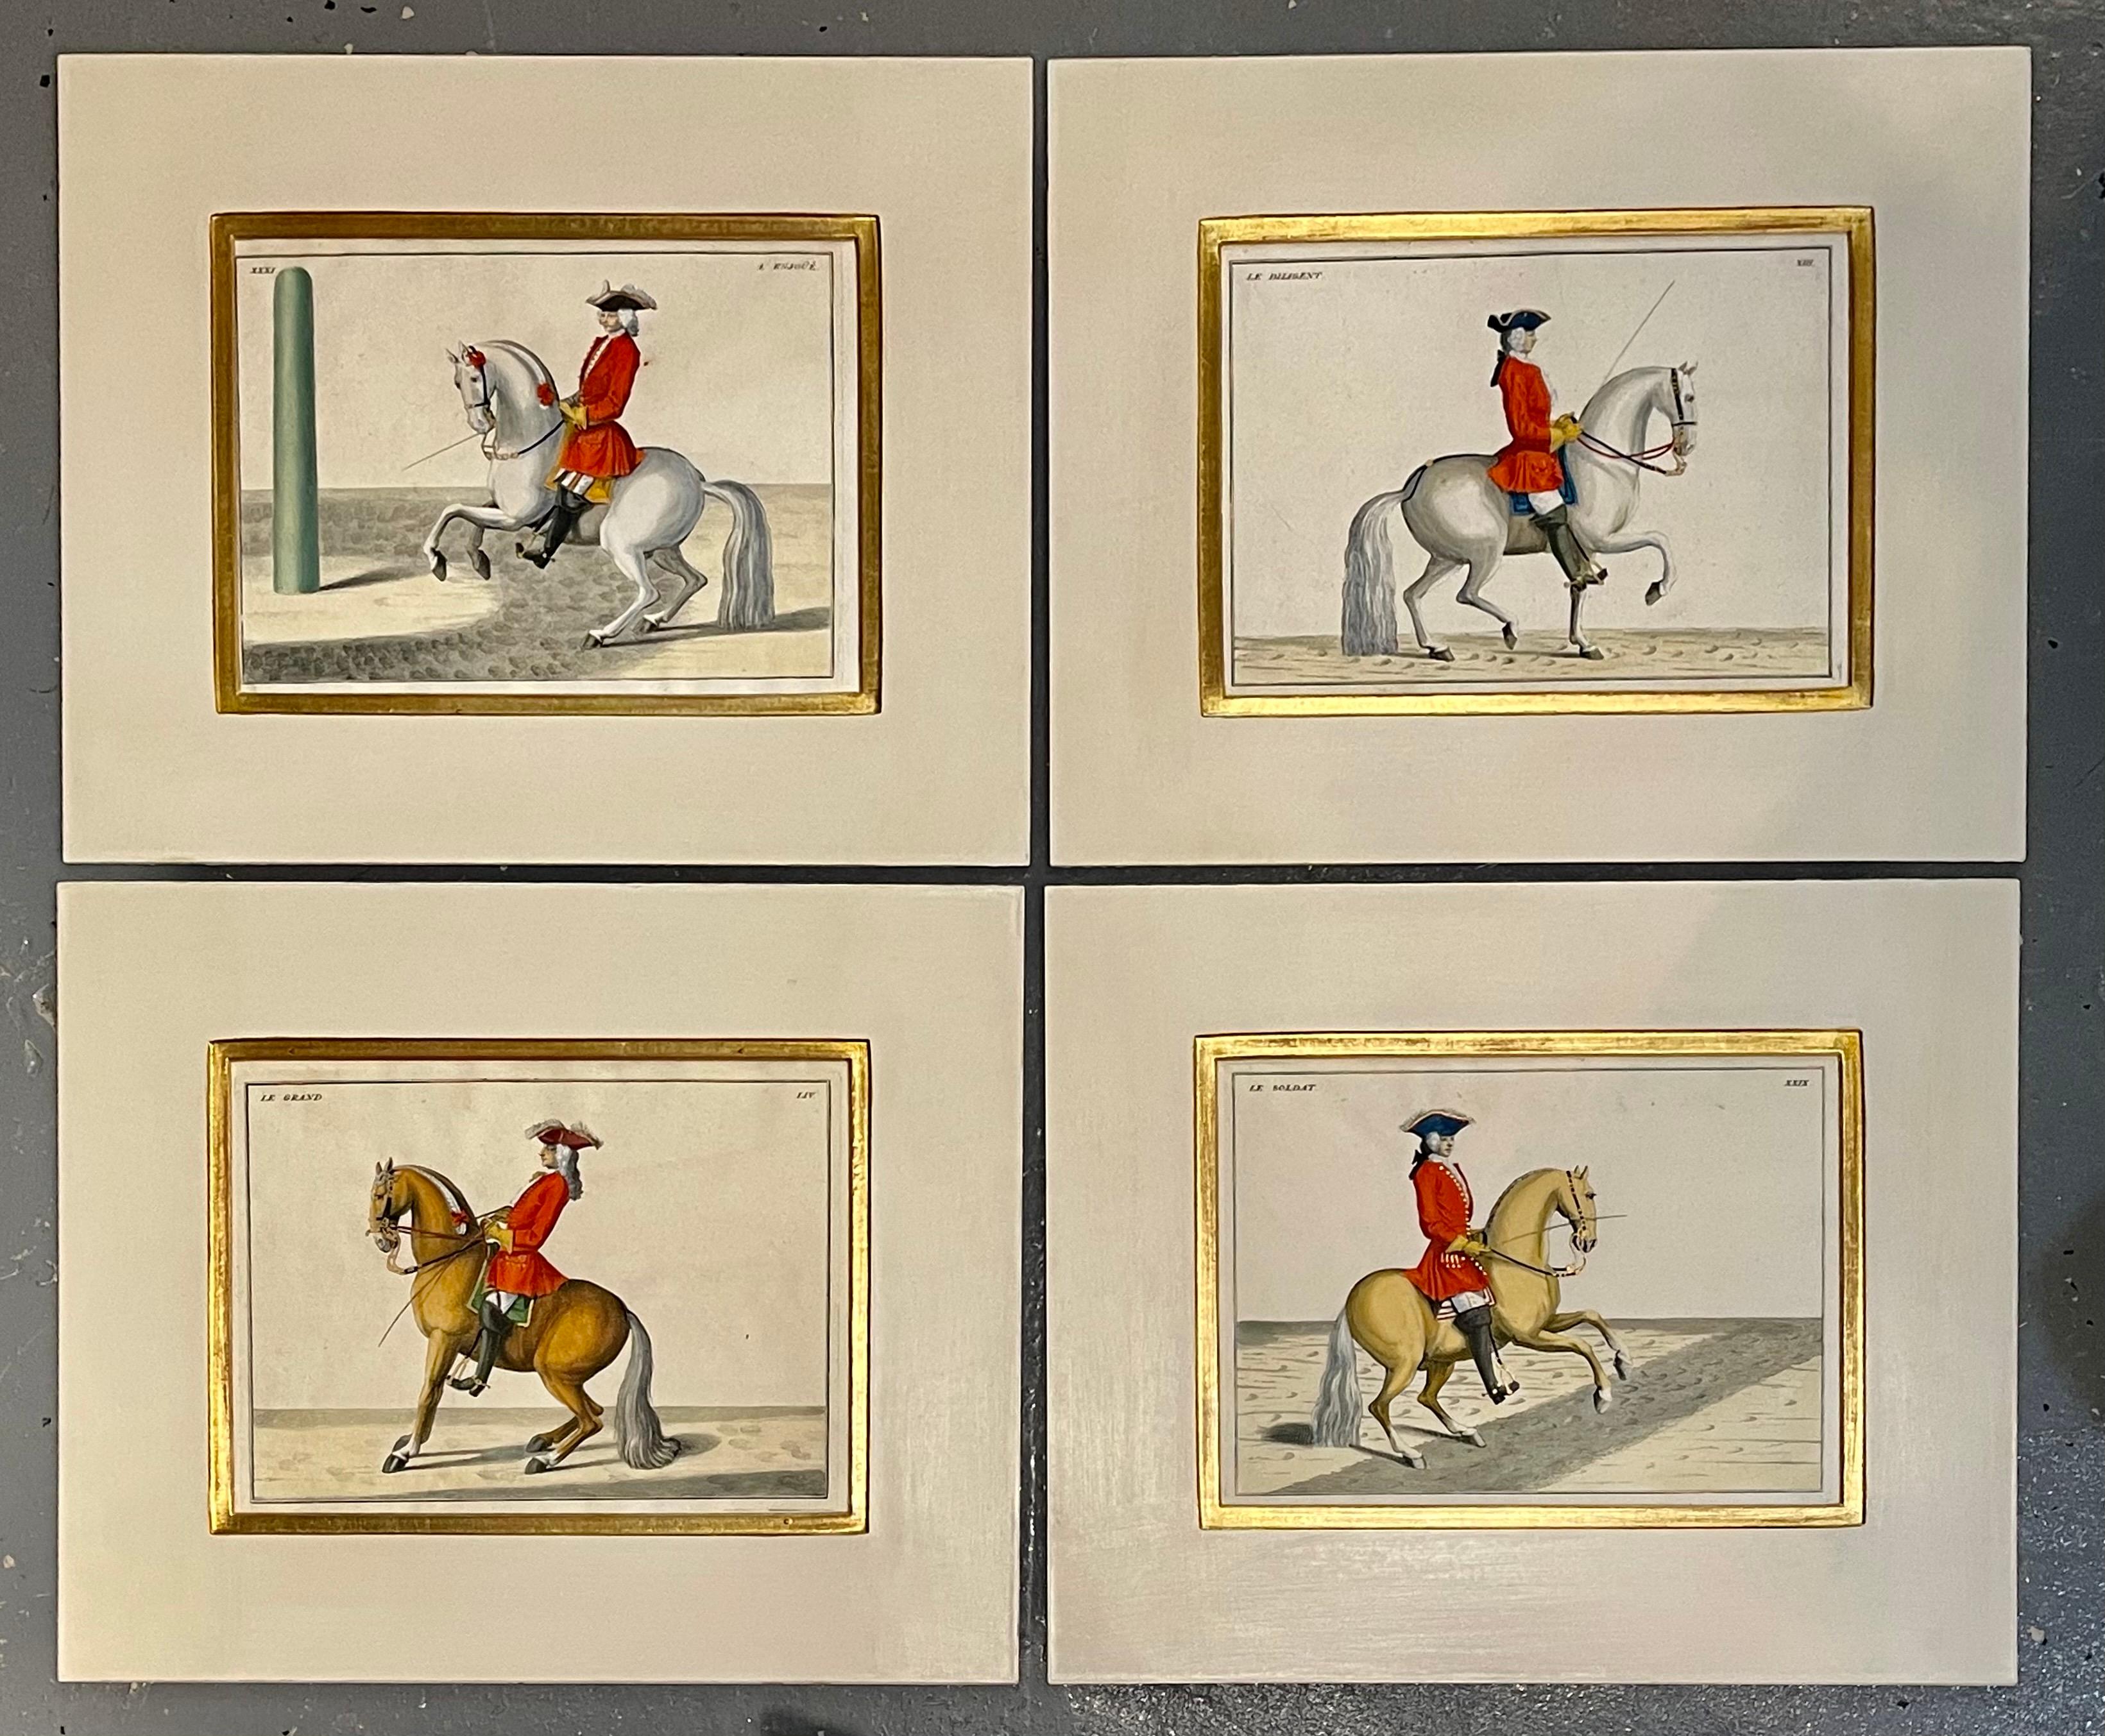 Four engravings of horse riders Le Soldat, Le Grand, Le Diligent, L' Enjoue. The Great Sholdier finely matted with a gilt border. One of several groupings.
This is part of our extensive collection which just arrived from Chicago's renowned interior